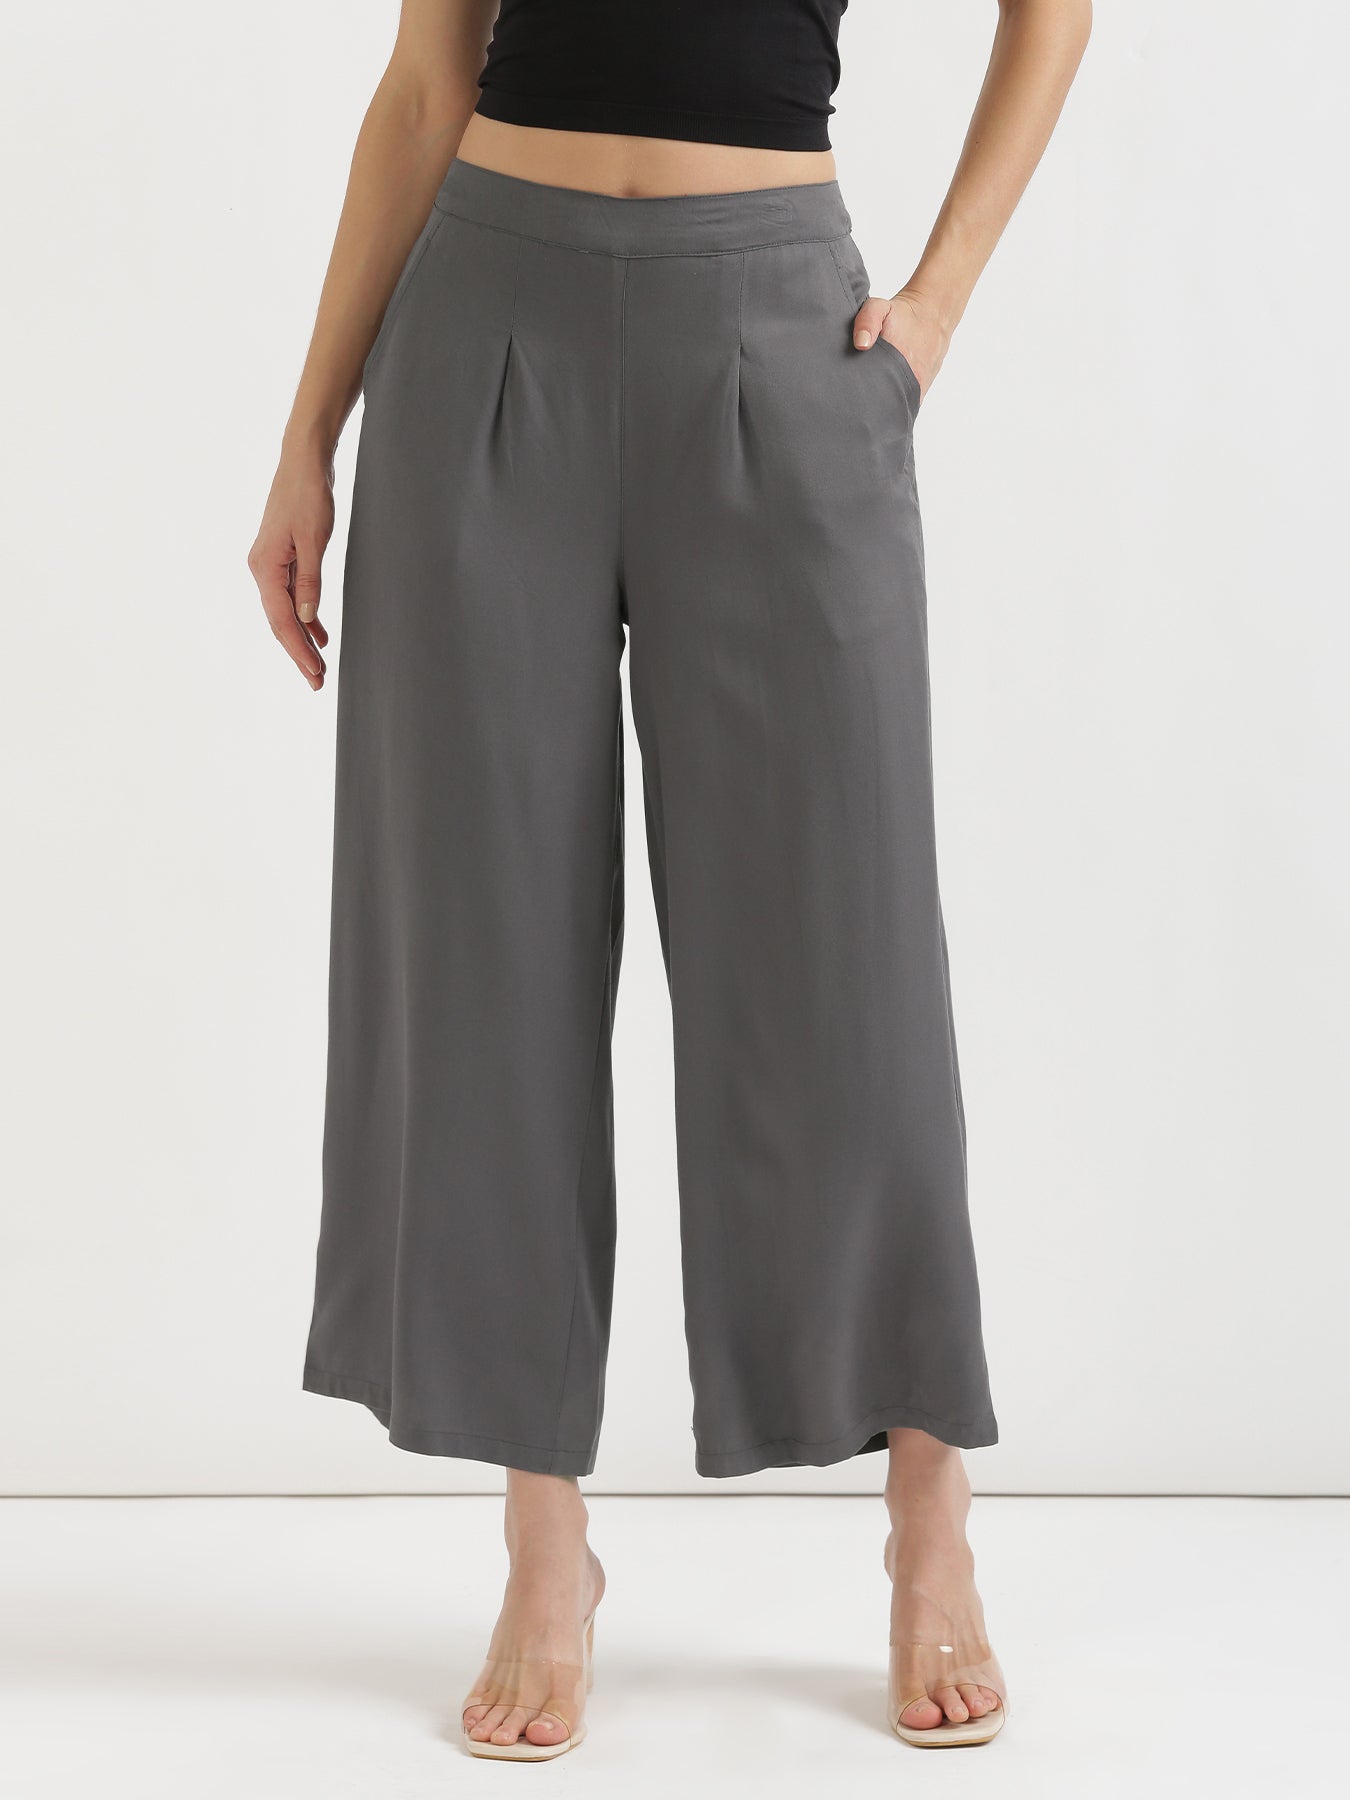 ESHE MULTICOLOUR PALAZZO TROUSER by heritageclothings - Flared pants an -  Afrikrea